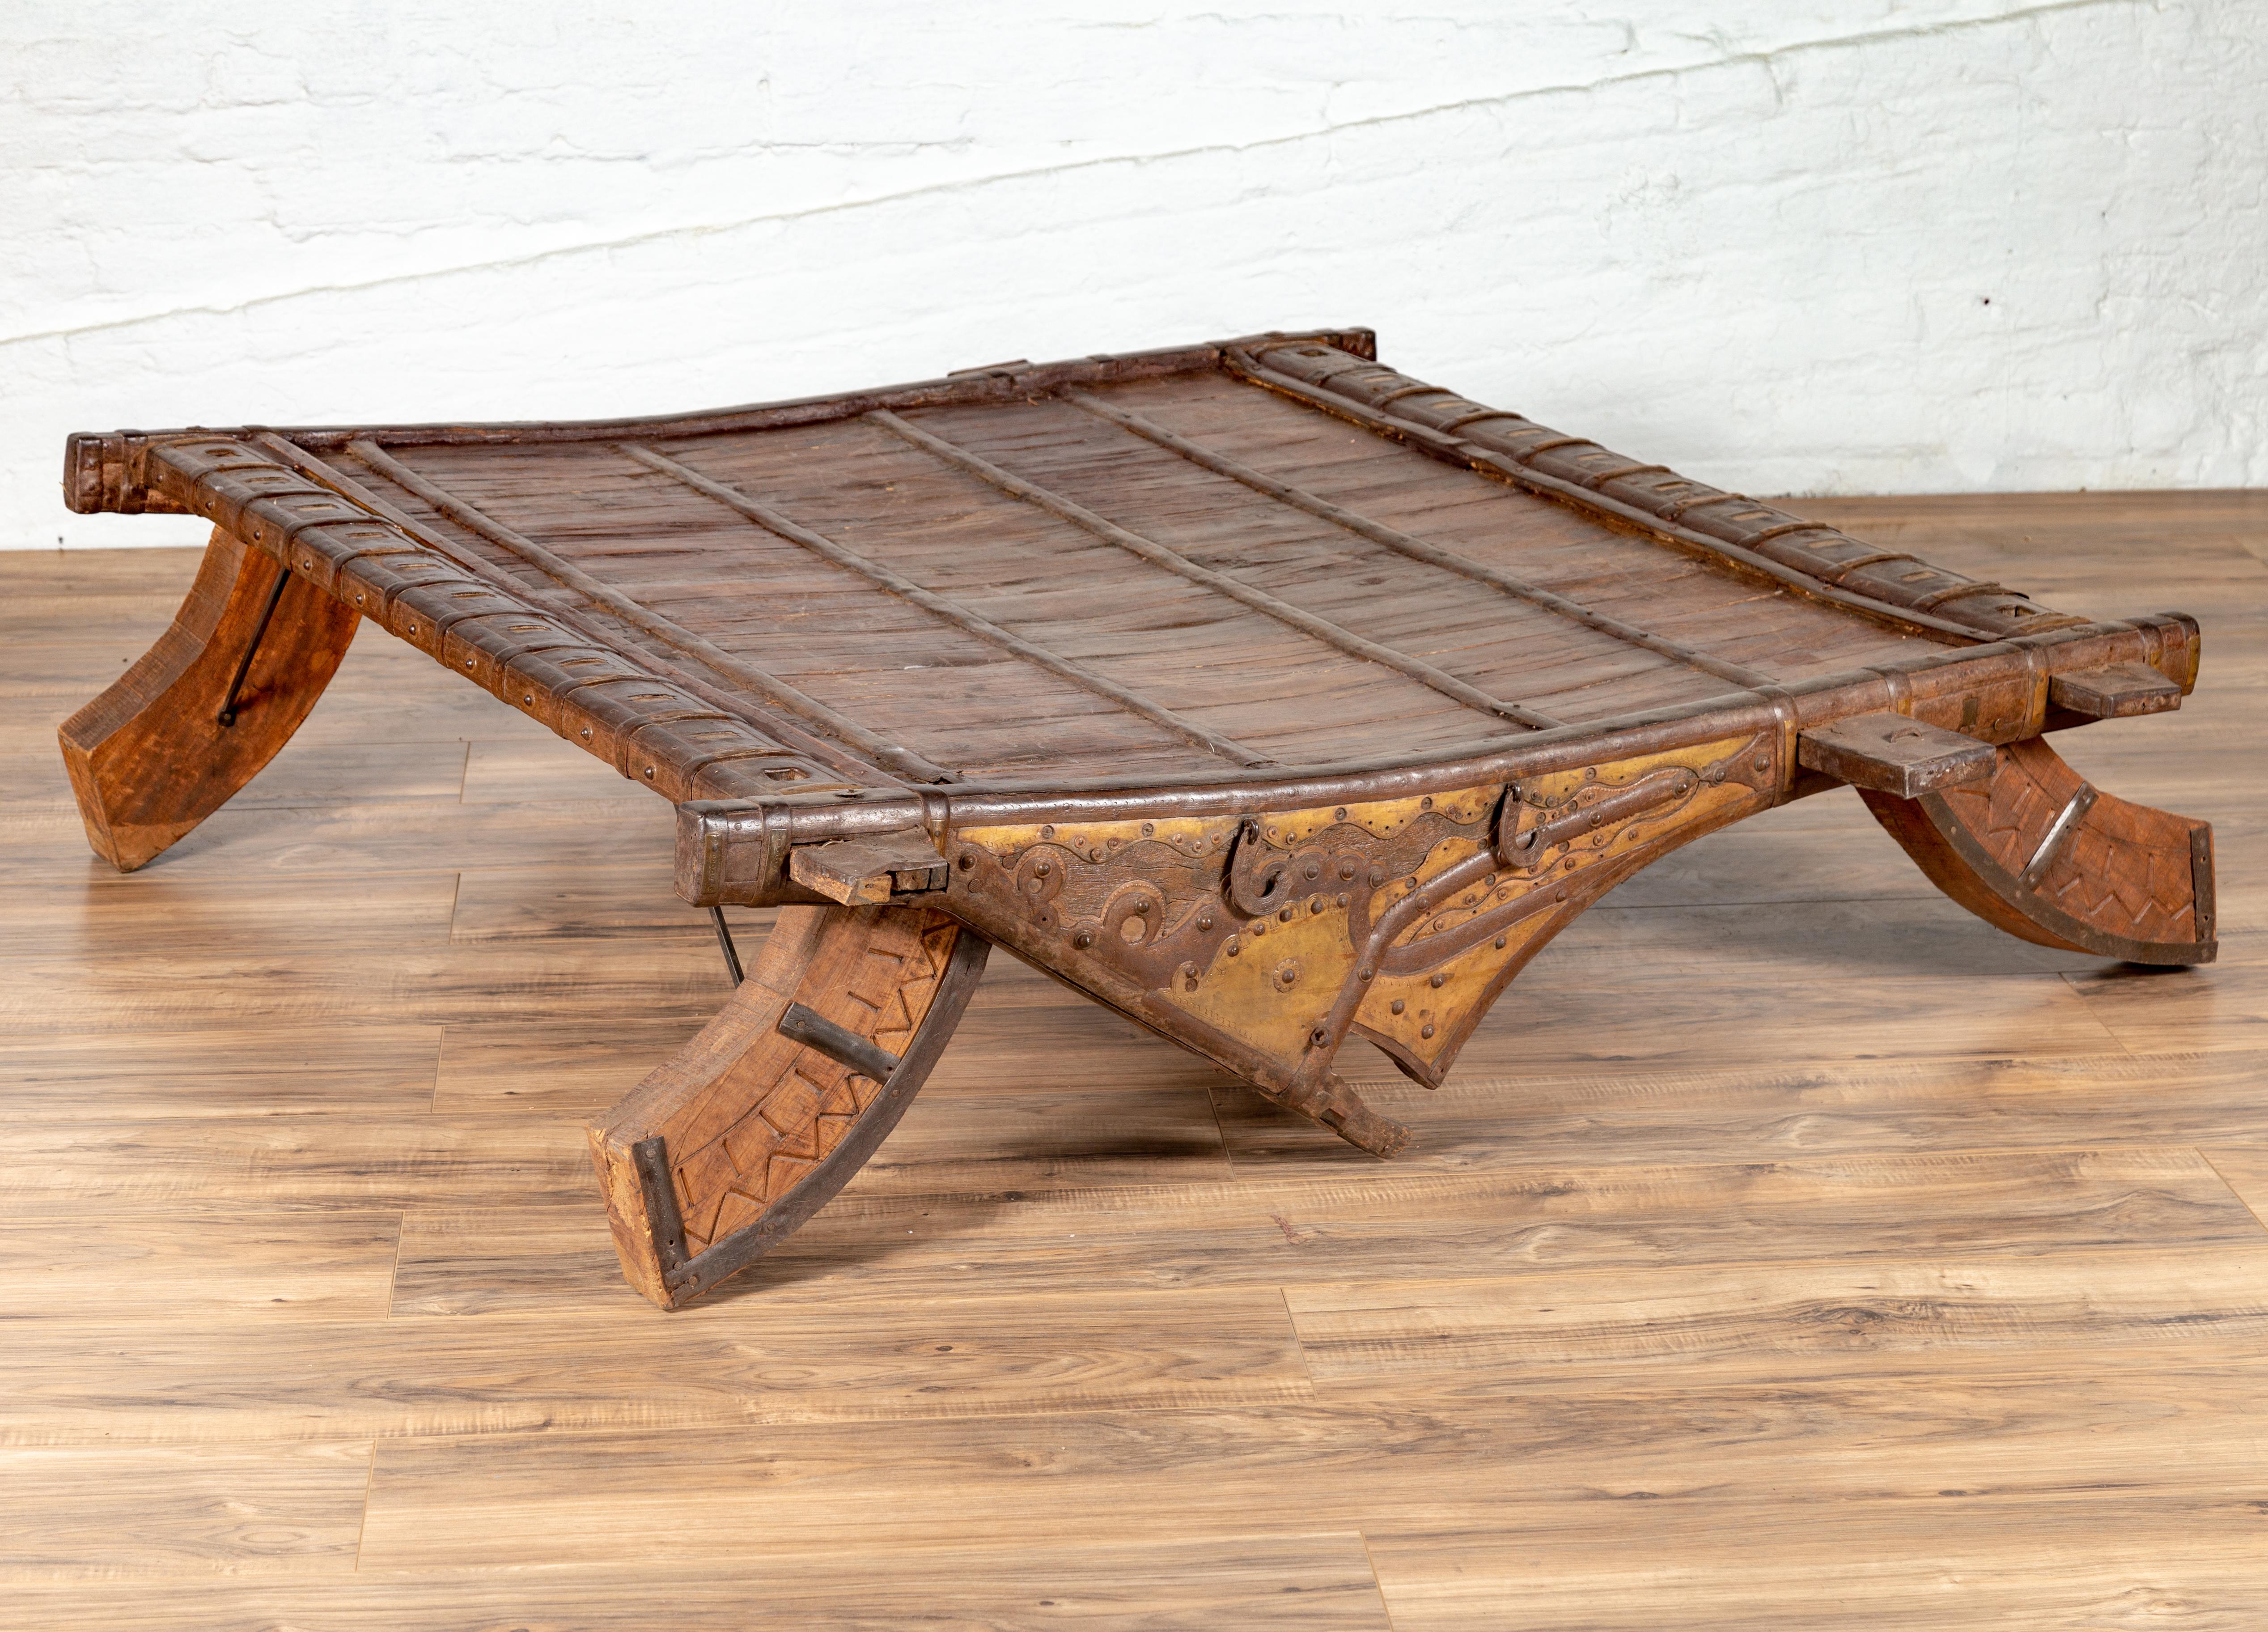 An Indian wooden ox cart with metal accents from the 19th century, made into a coffee table. We have two tables available, priced and sold individually. Perfect to be used as a coffee table, this conversation piece is an old wooden ox cart accented